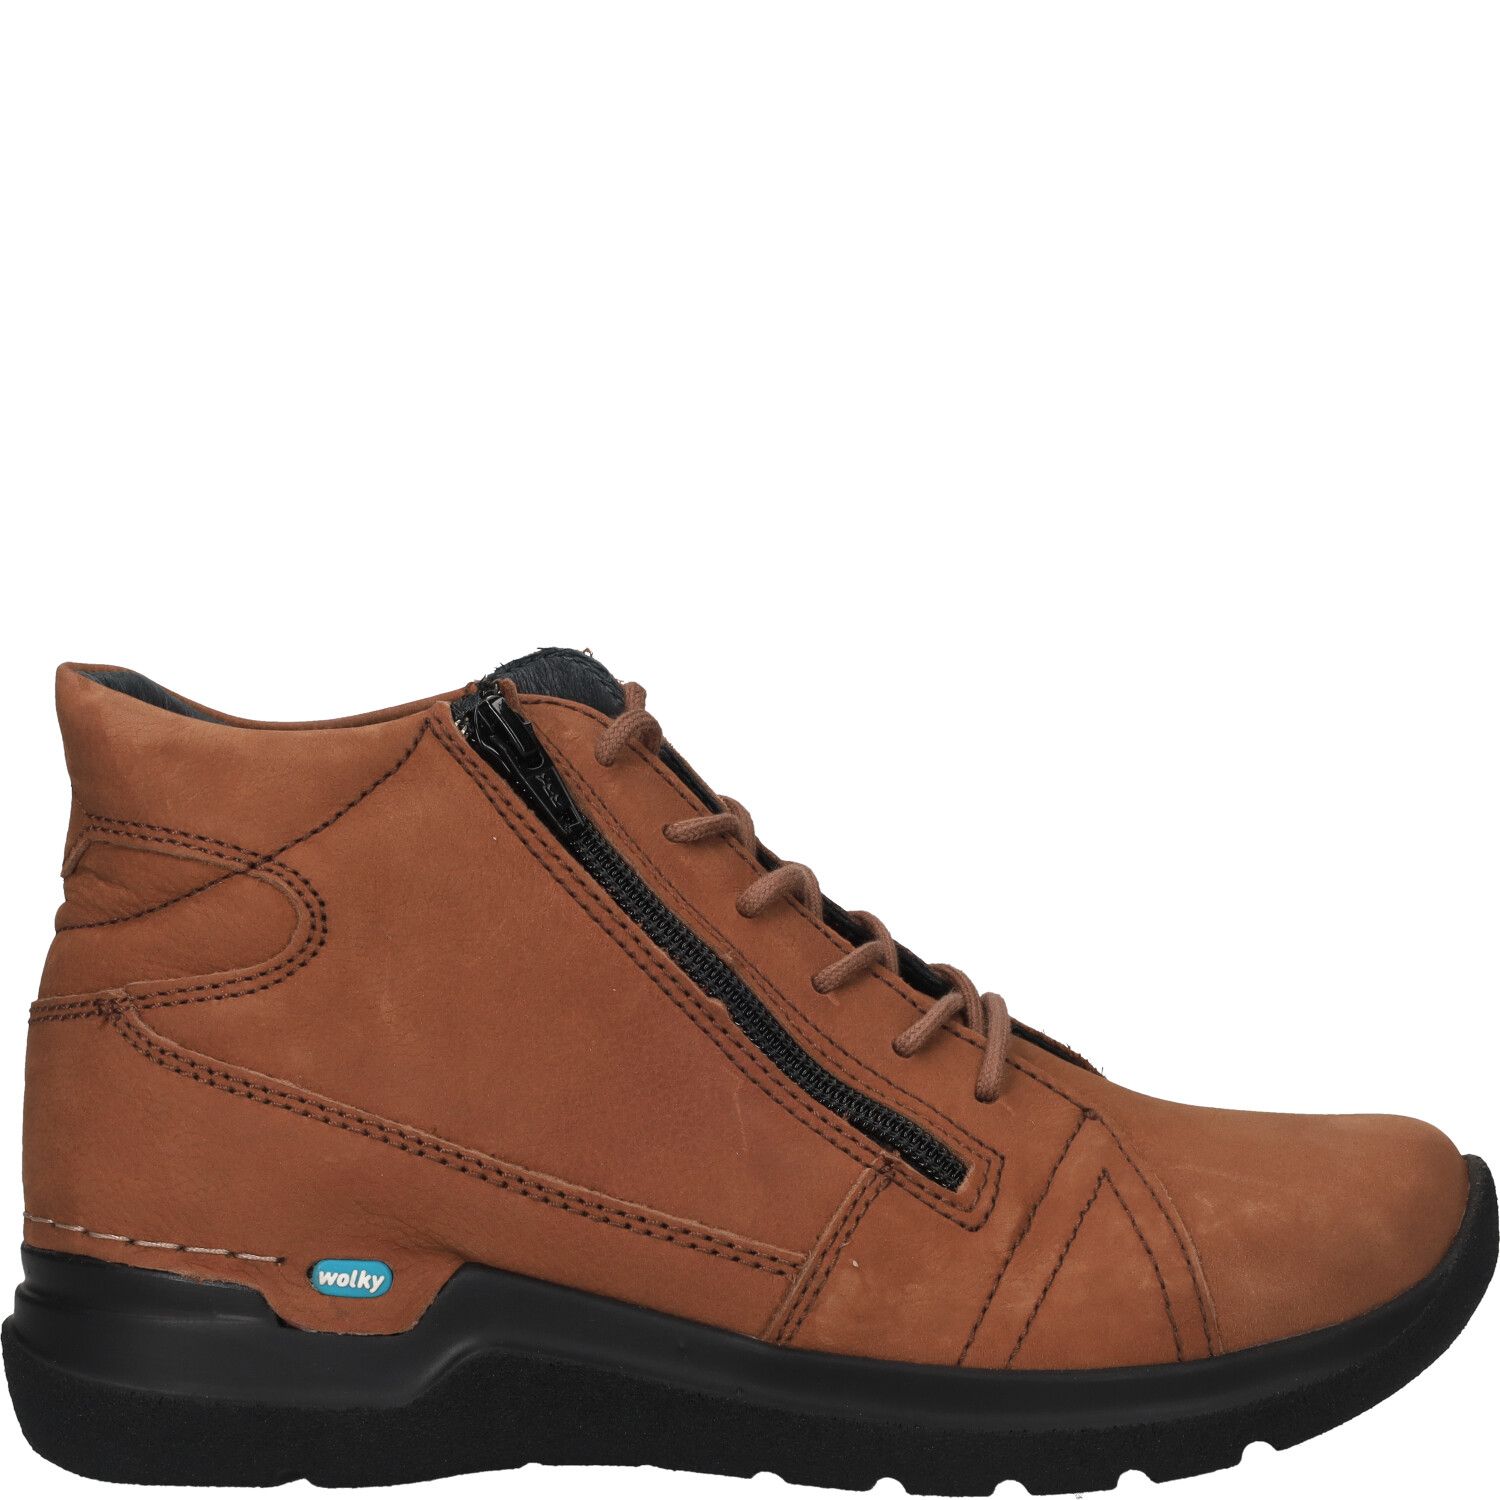 Wolky Why Veterboot Dames Cognac